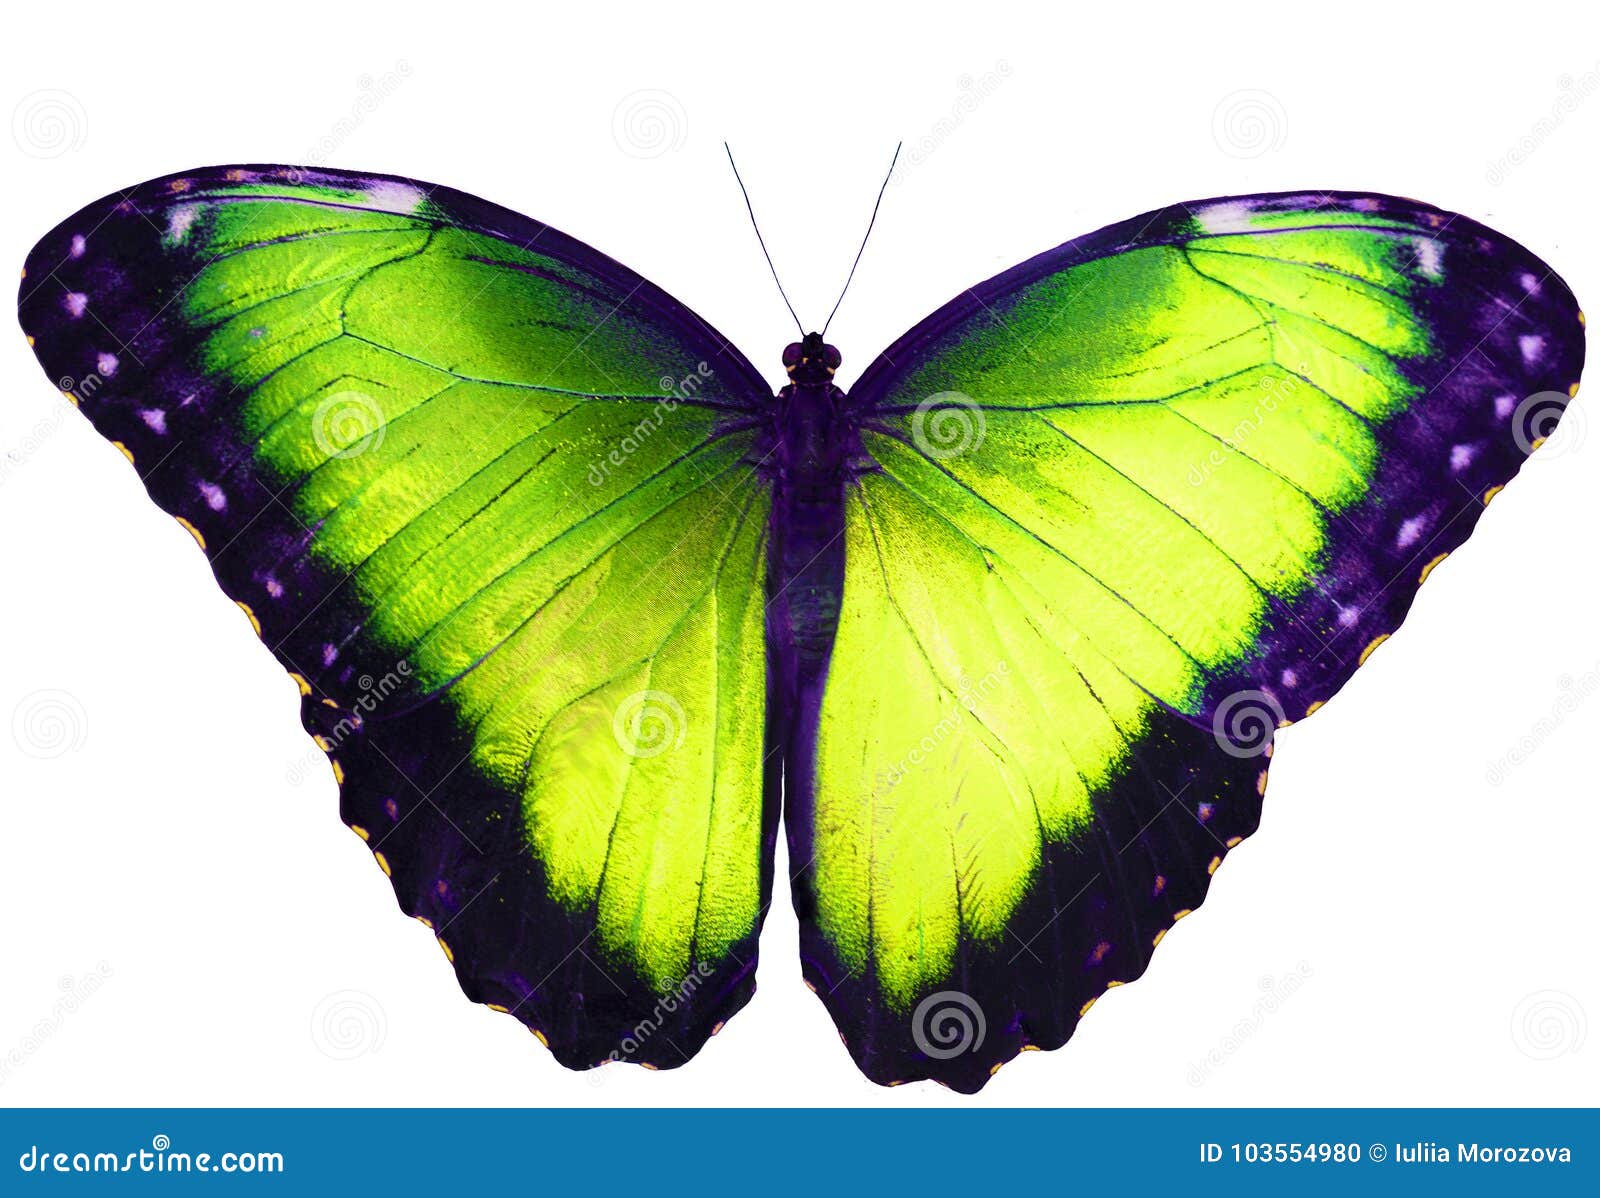 yellow green butterfly  on white background with spread wings